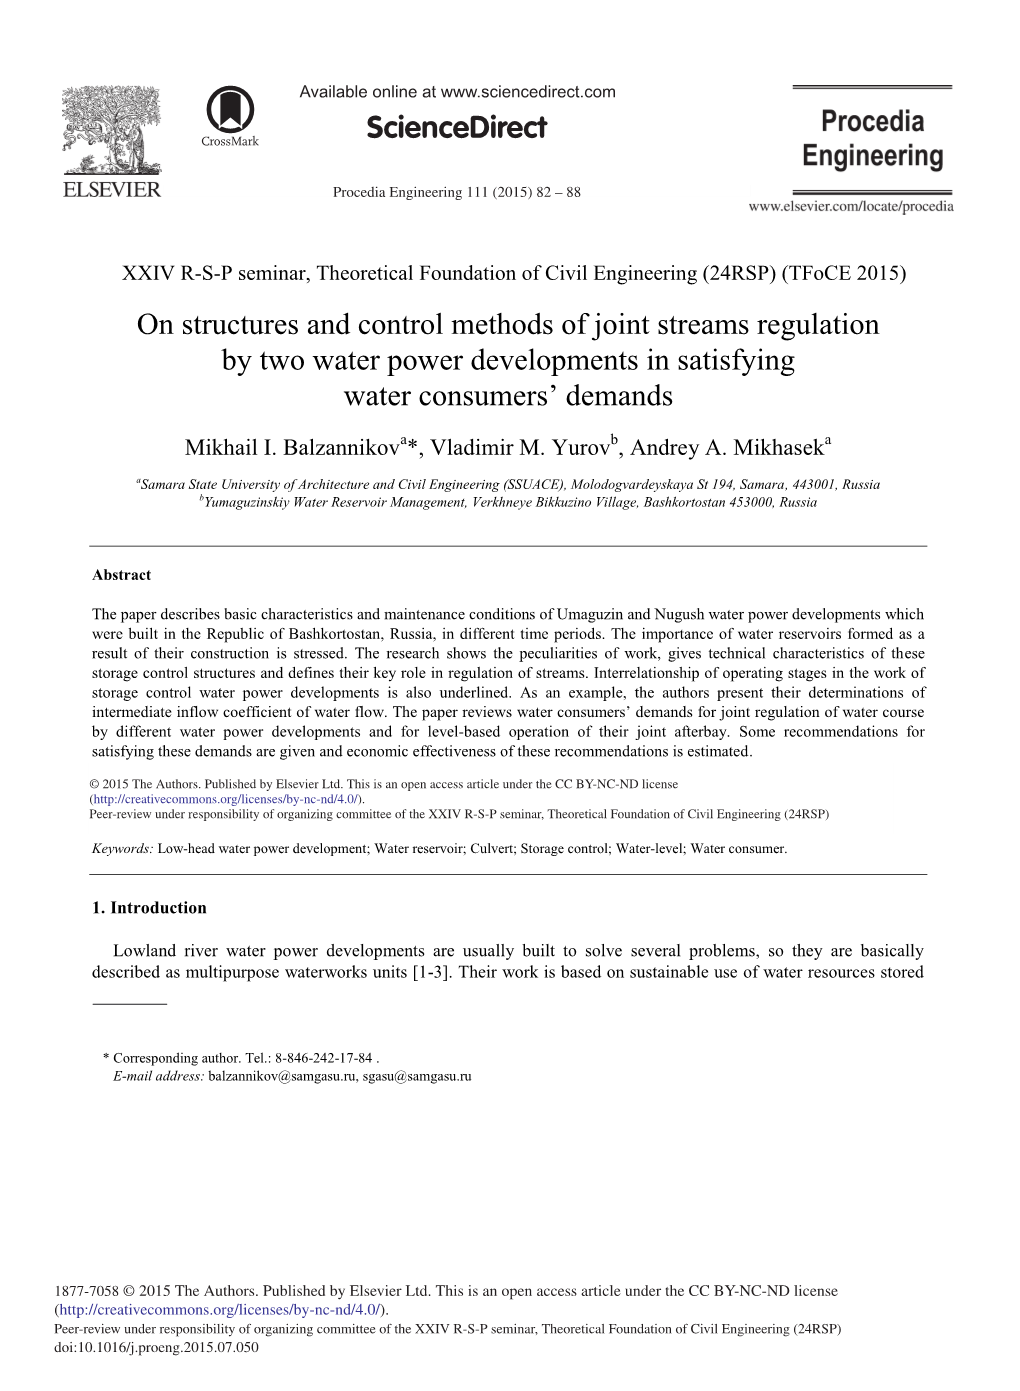 On Structures and Control Methods of Joint Streams Regulation by Two Water Power Developments in Satisfying Water Consumers’ Demands